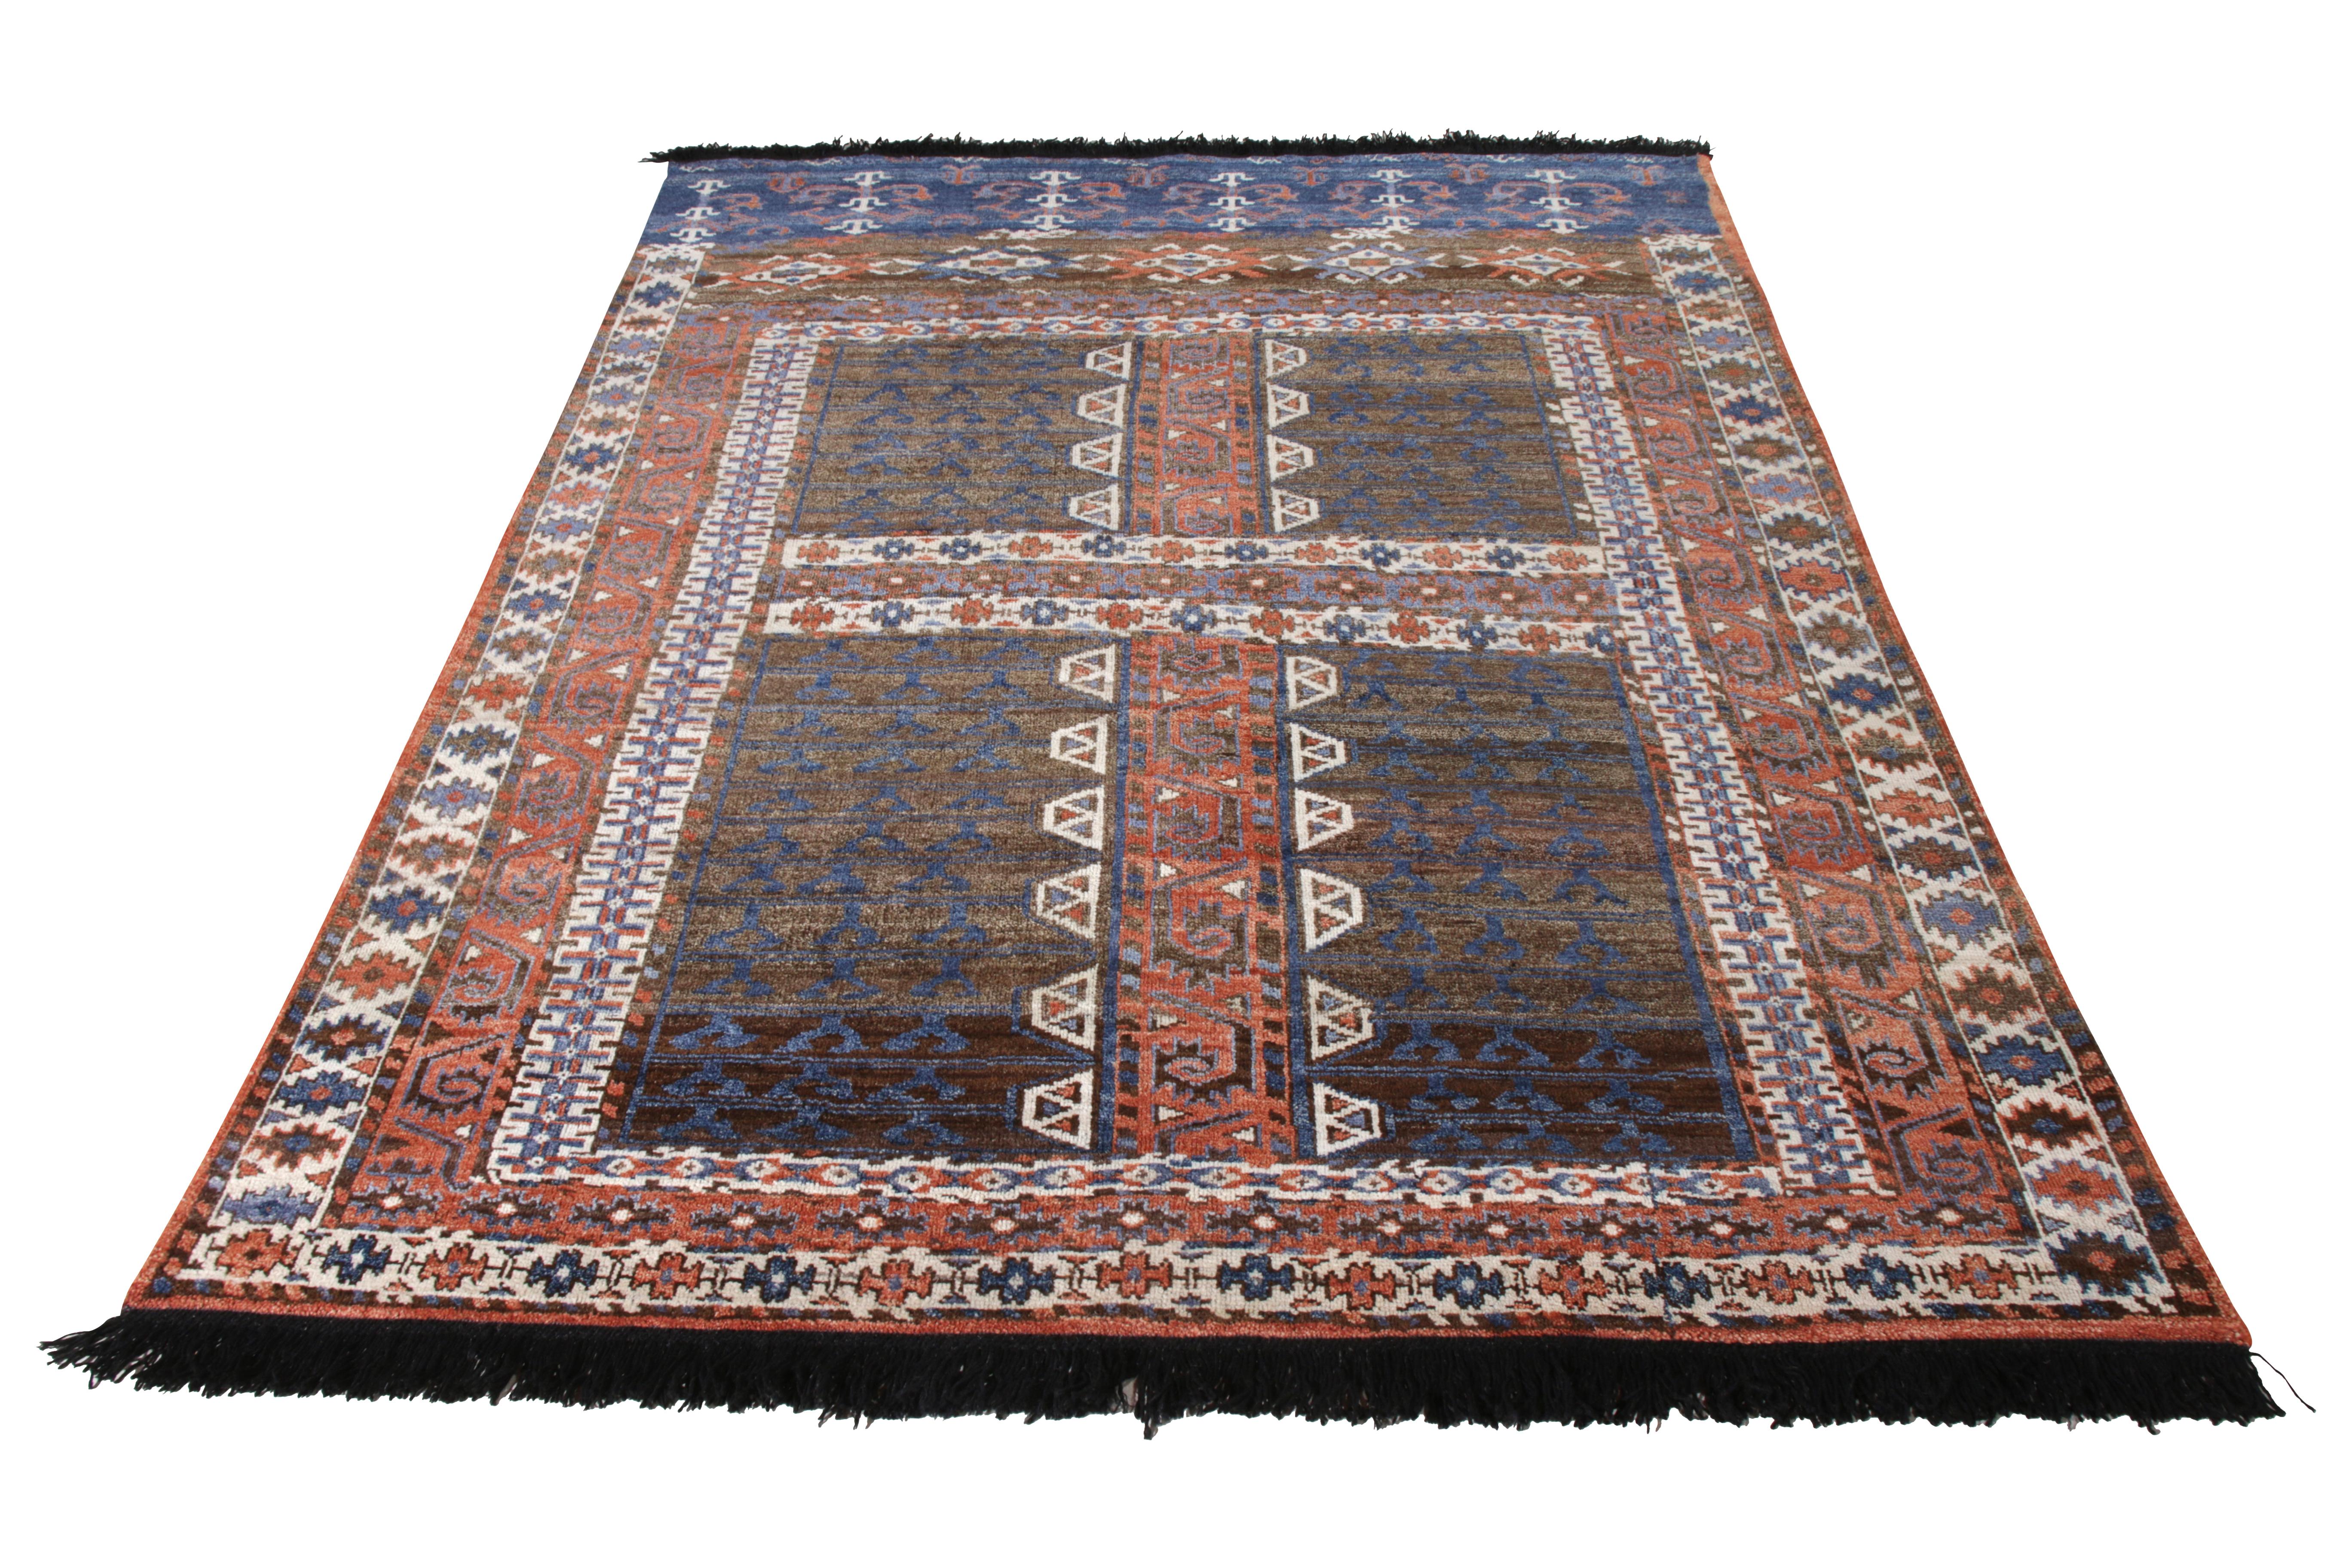 A 6x8 ode to celebrated tribal rug styles from Rug & Kilim’s Burano Collection. 
Hand knotted in wool, enjoying brown and red with white and blue in the all over geometric pattern. 
Drawing veritable inspiration from Persian Baluch rugs, likewise